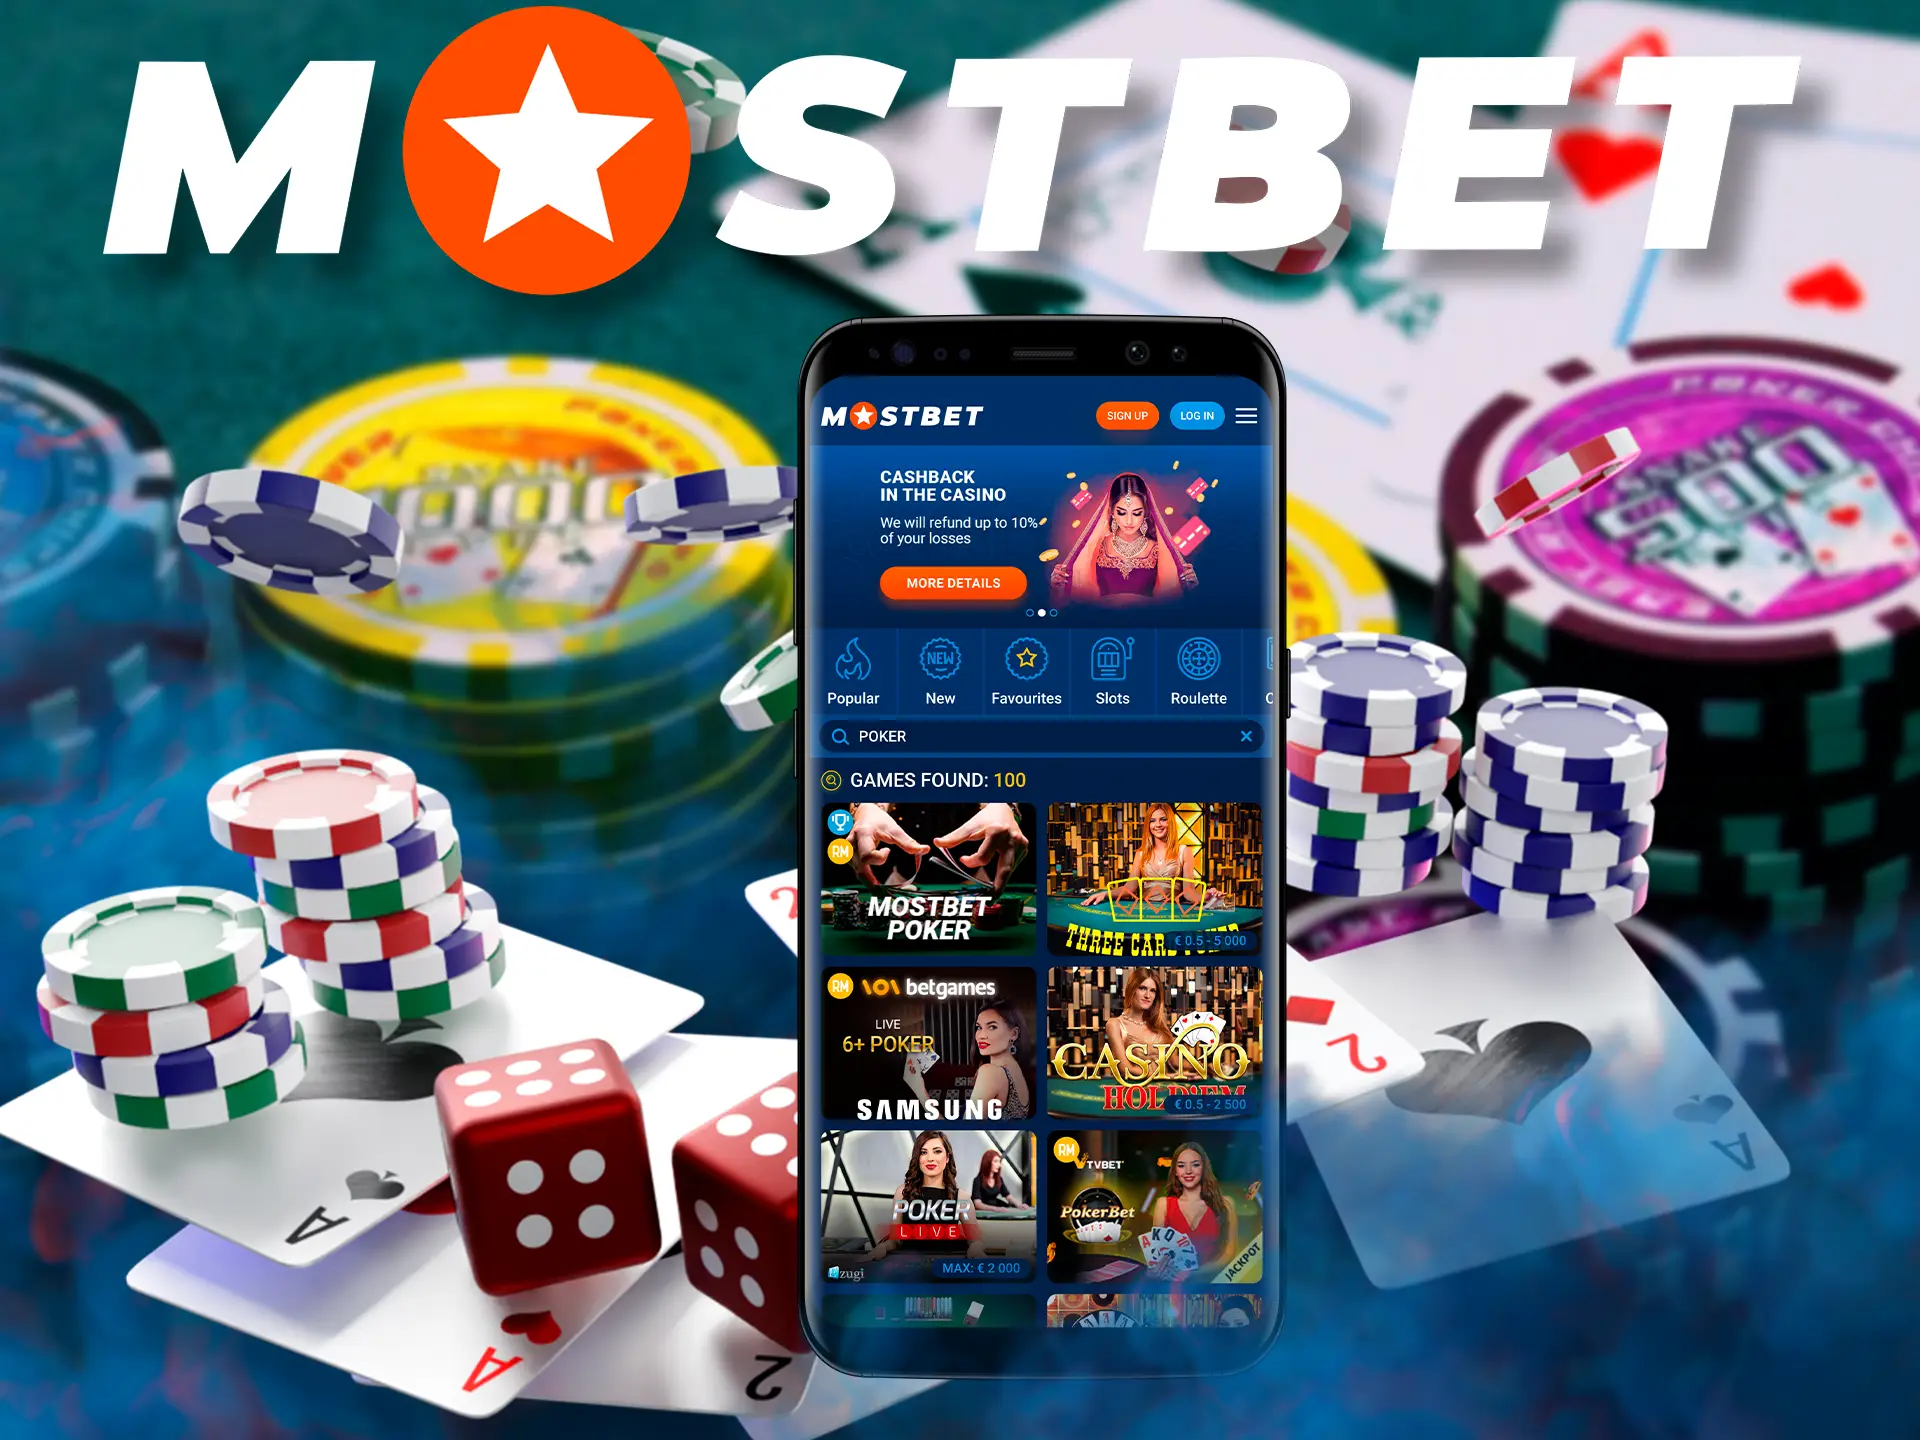 In order to get the full casino experience you can get Mostbet software for Android absolutely free.